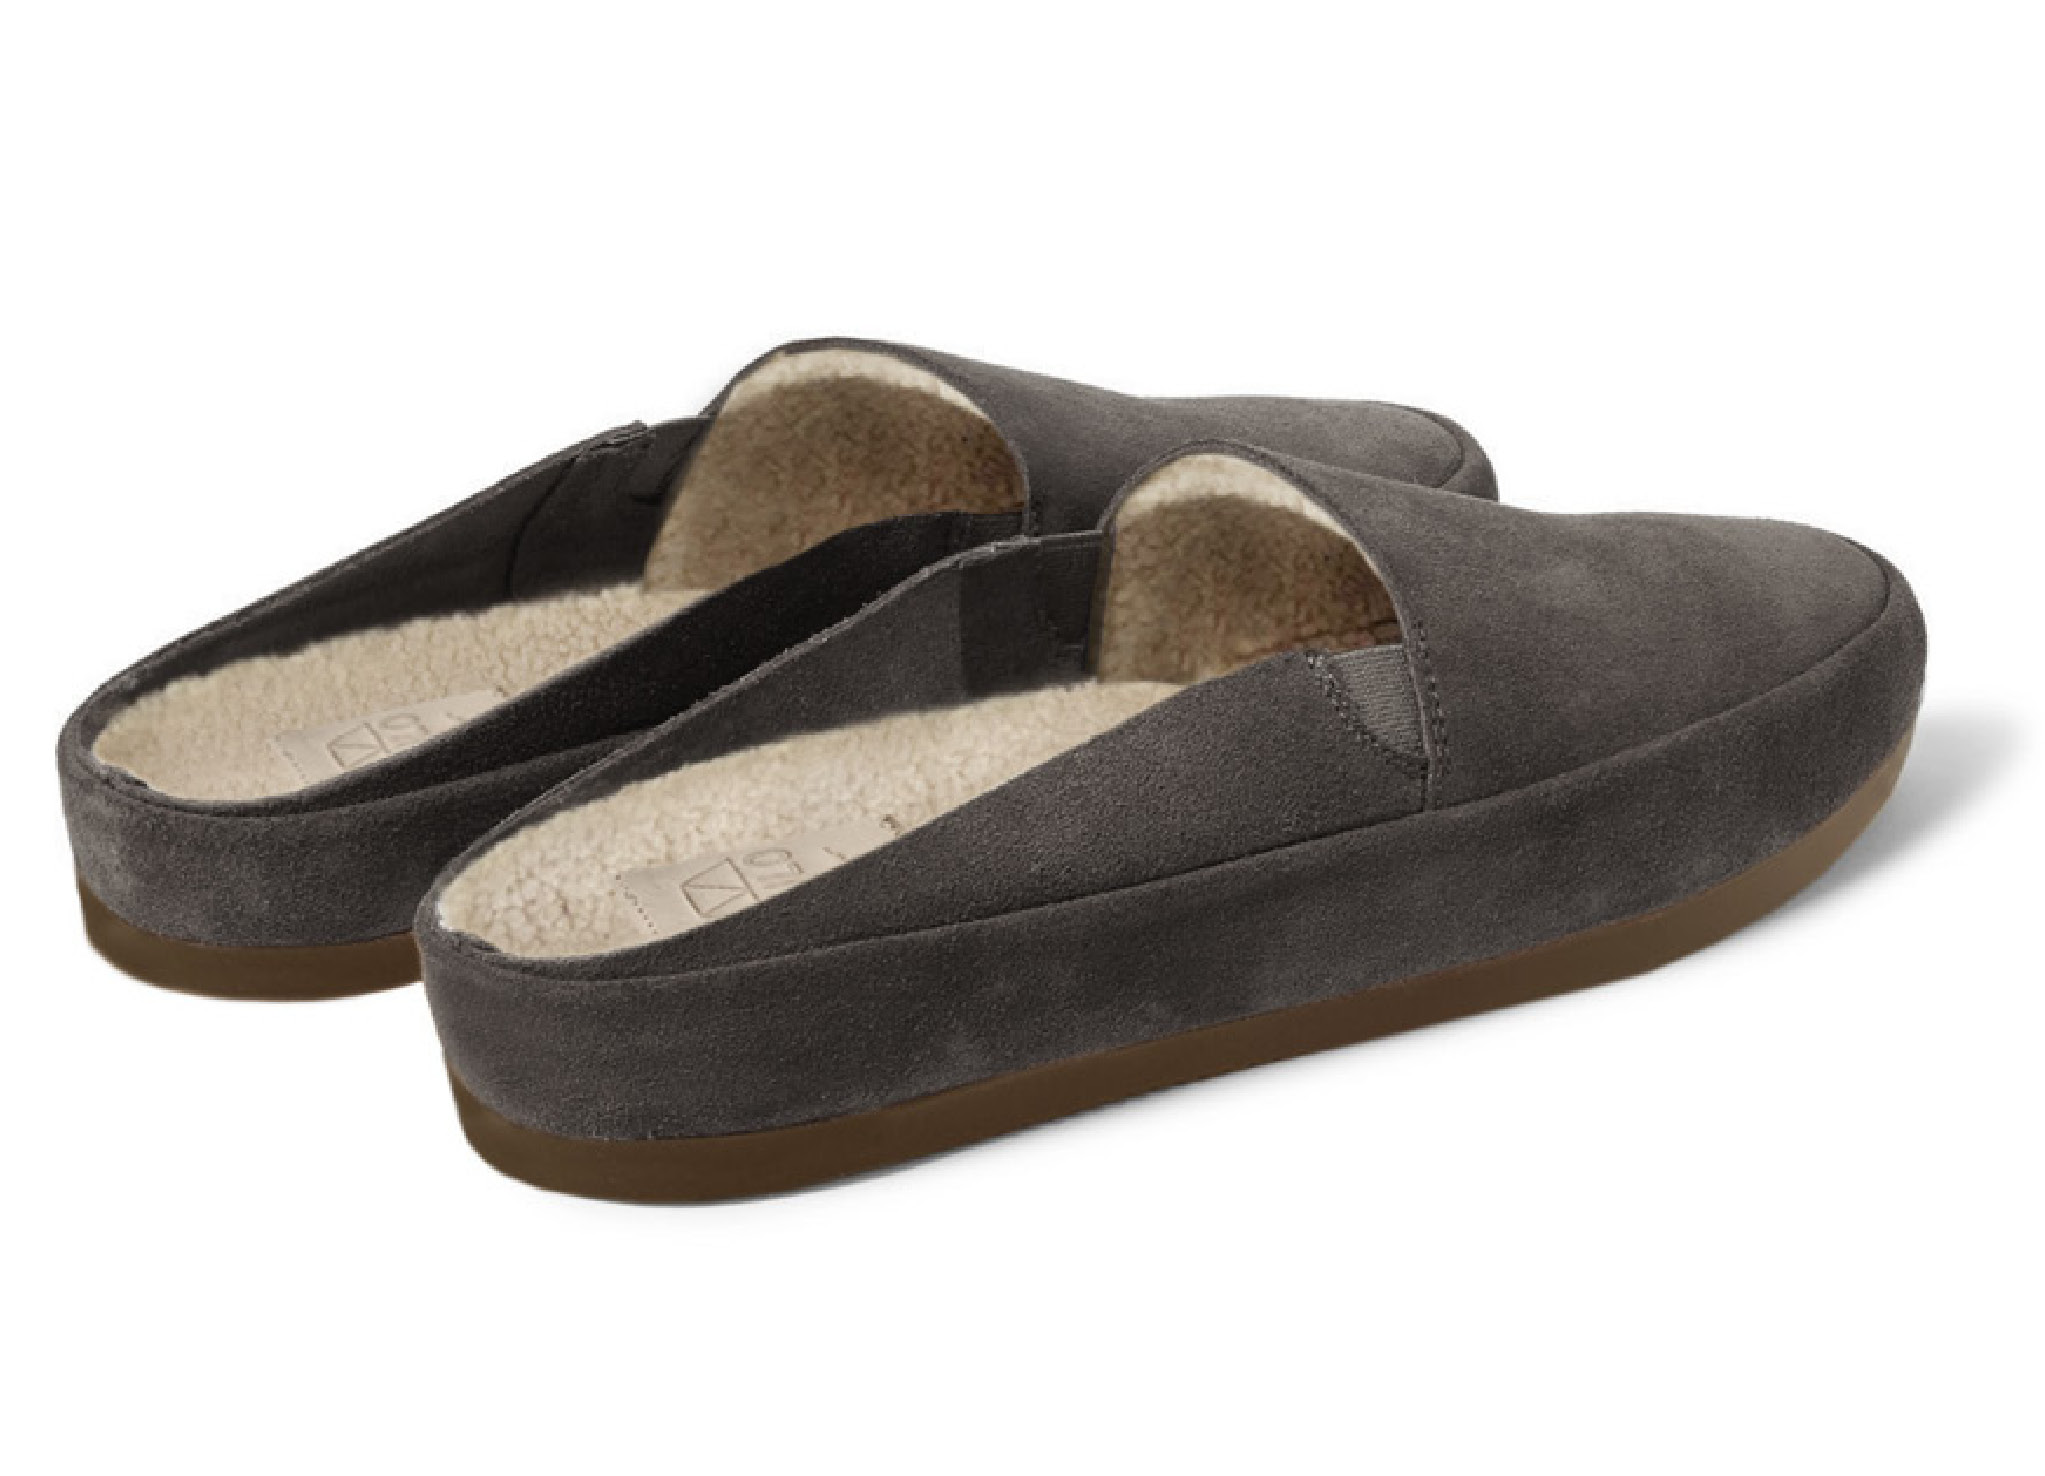 Mens Slippers in Brown Suede | MULO shoes